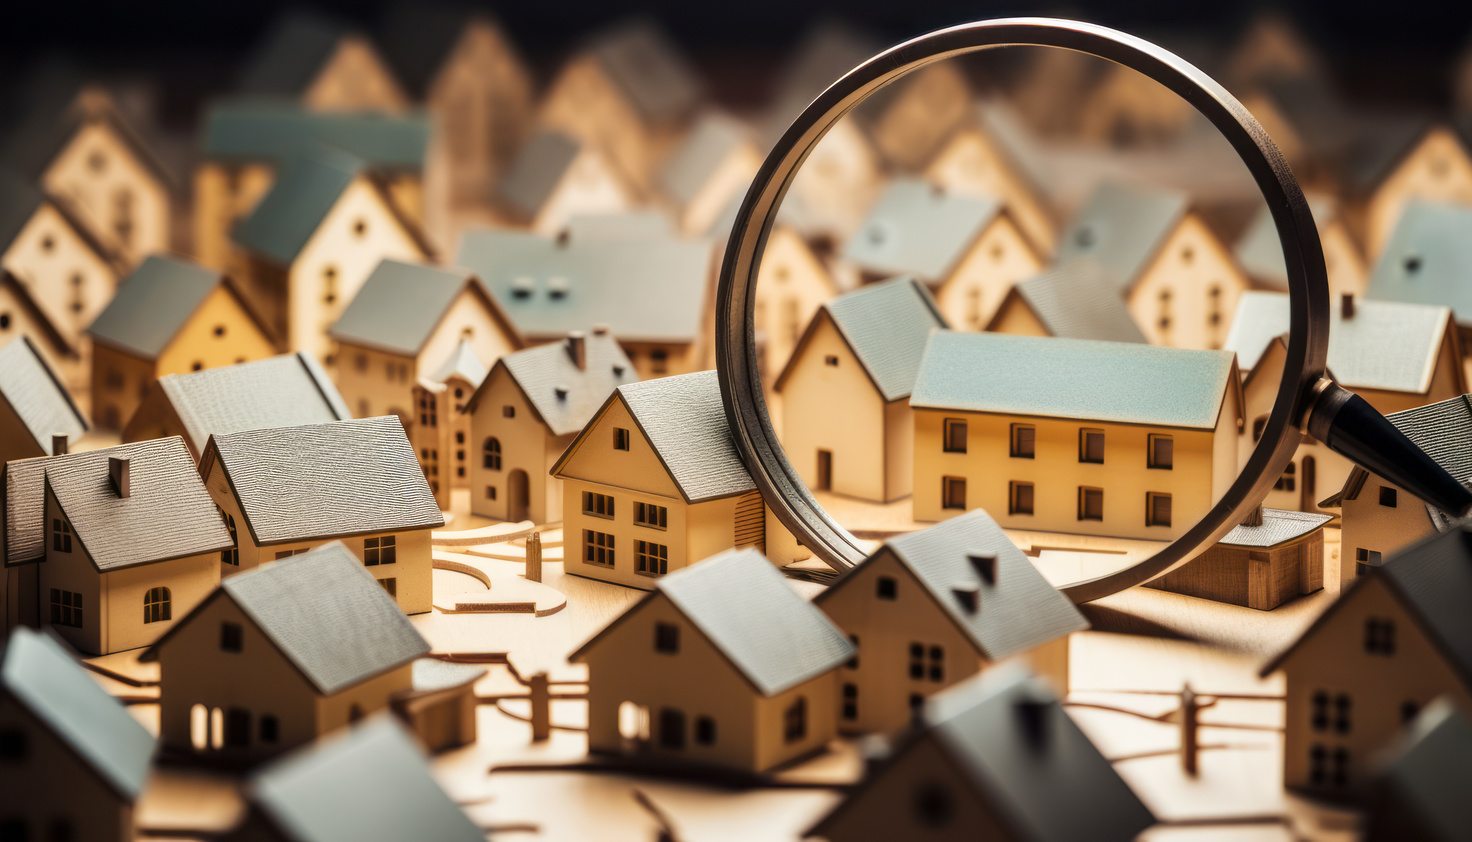 Magnifying glass highlighting specific wooden houses, symbolizing the scrutiny in deciding whether to get a home appraisal before selling.